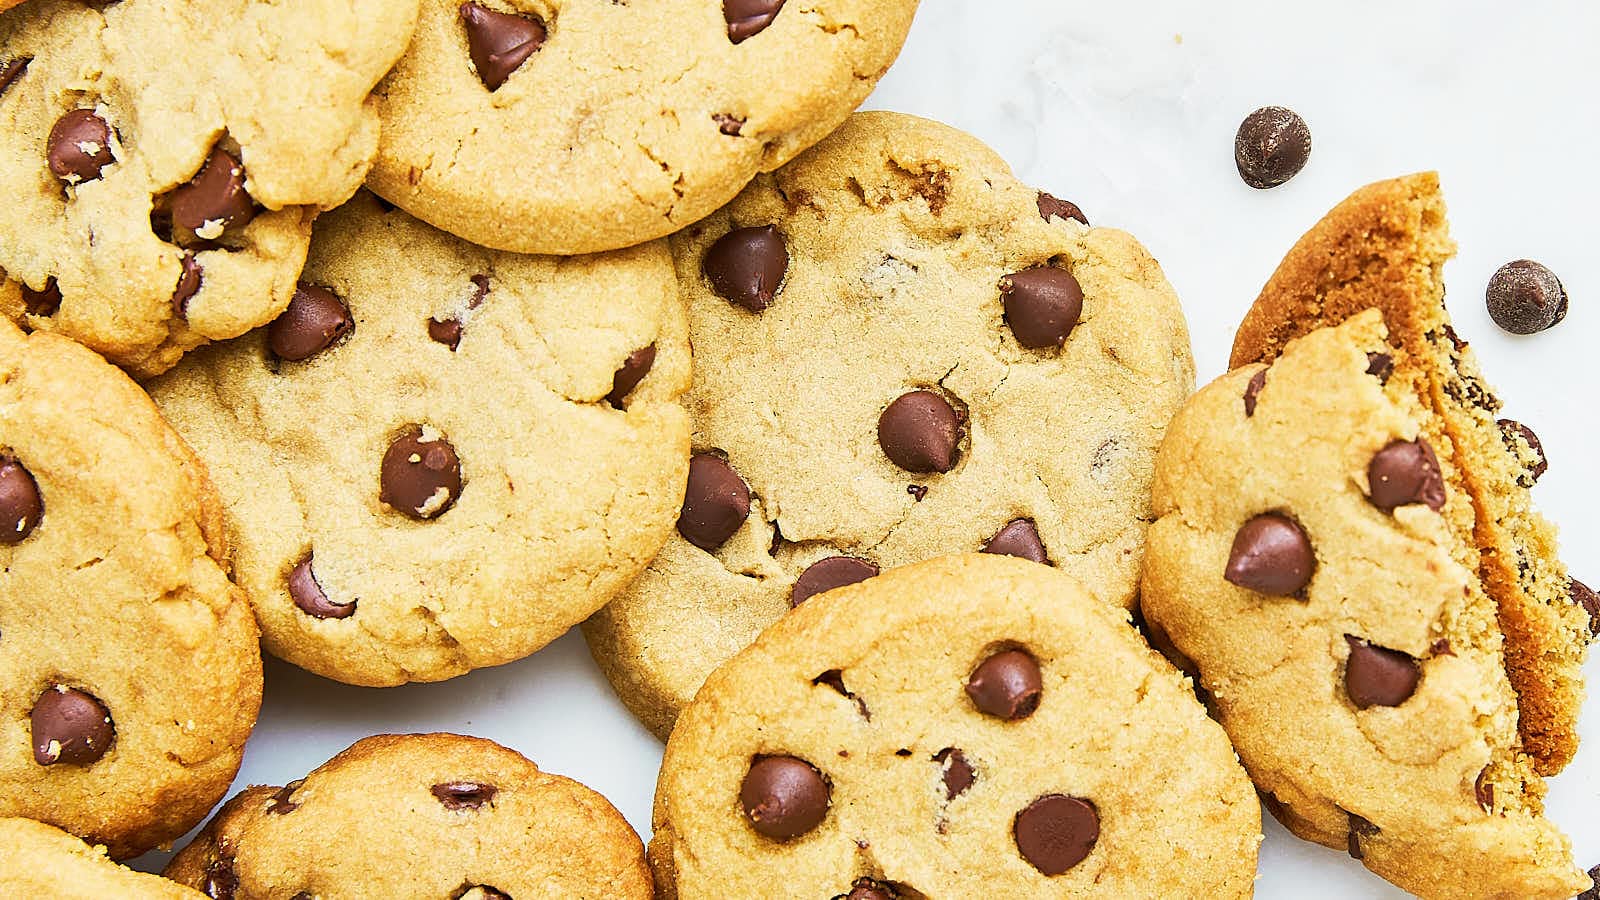 Easy Chocolate Chip Cookie recipe by Cheerful Cook.